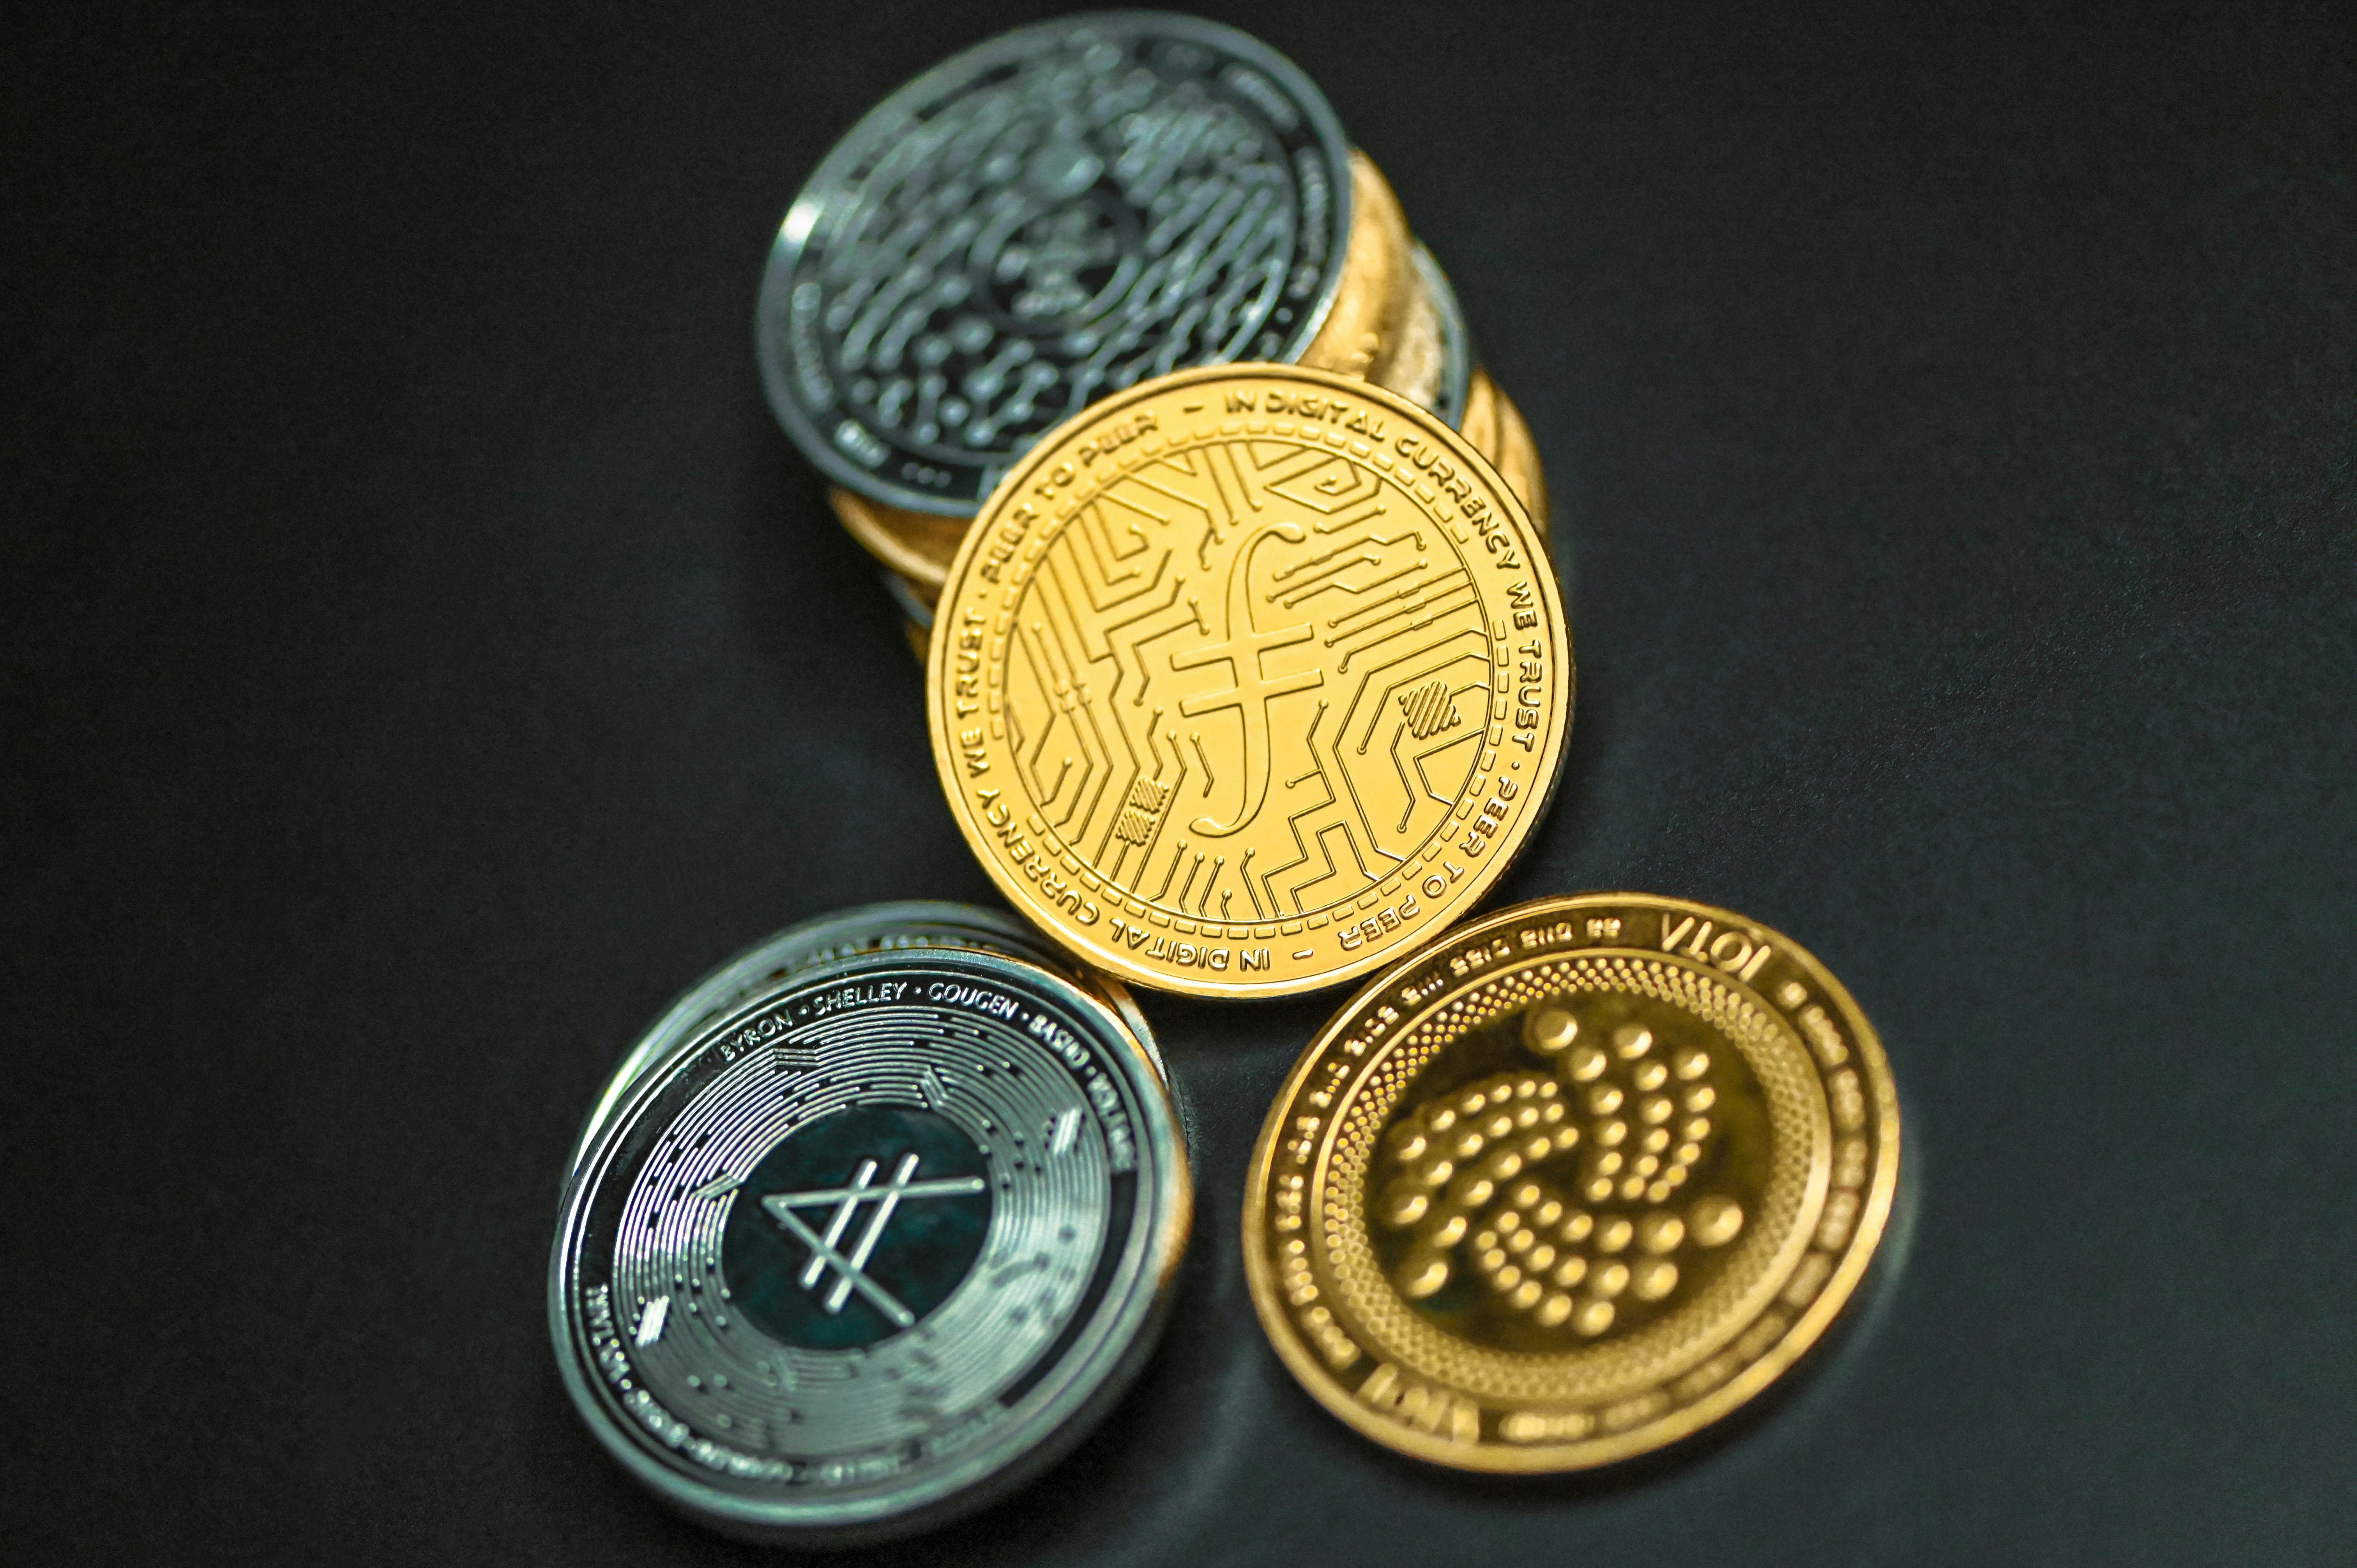 Filecoin, AMP coin, and IOTA coin together on a black surface